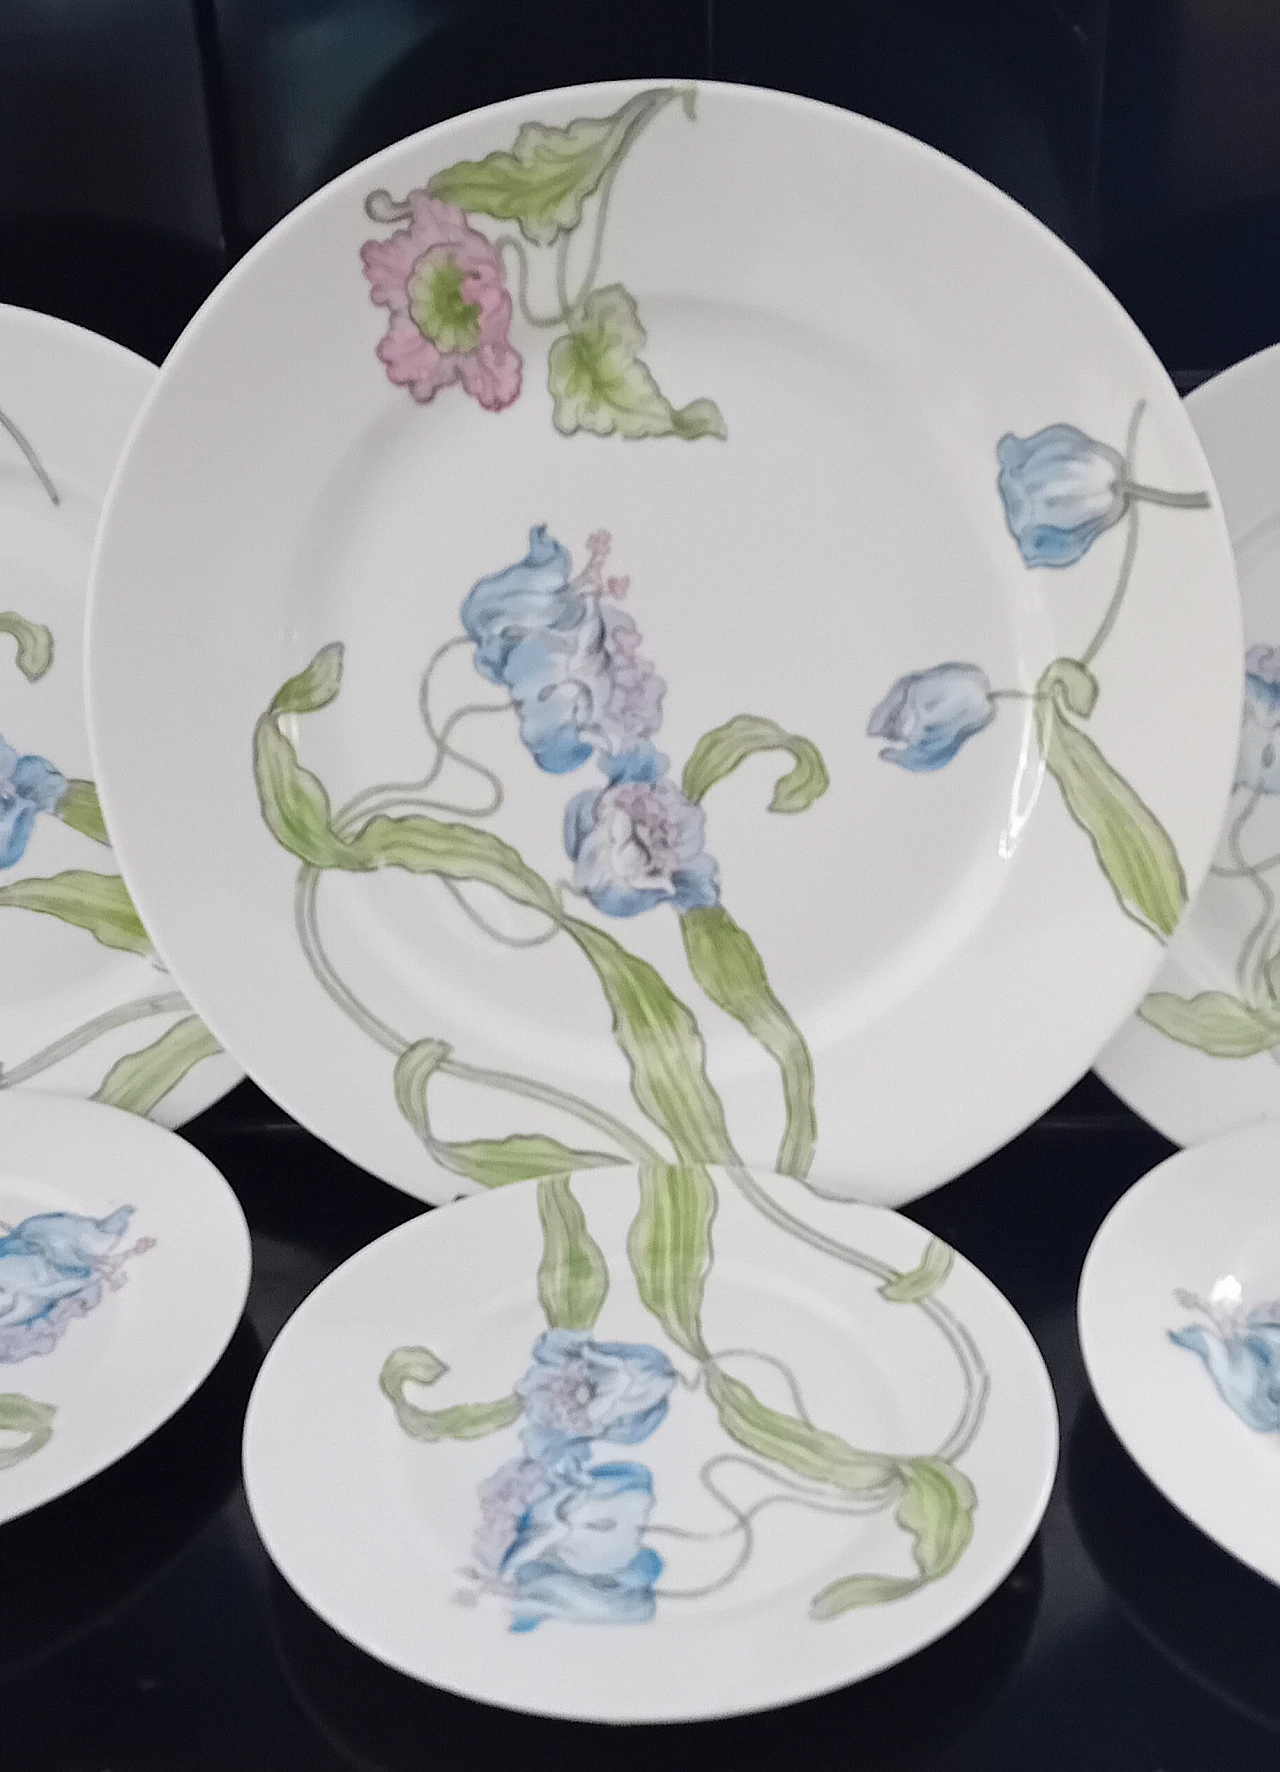 6 Art Nouveau porcelain plates in floral style by Ginori, 1920s 1